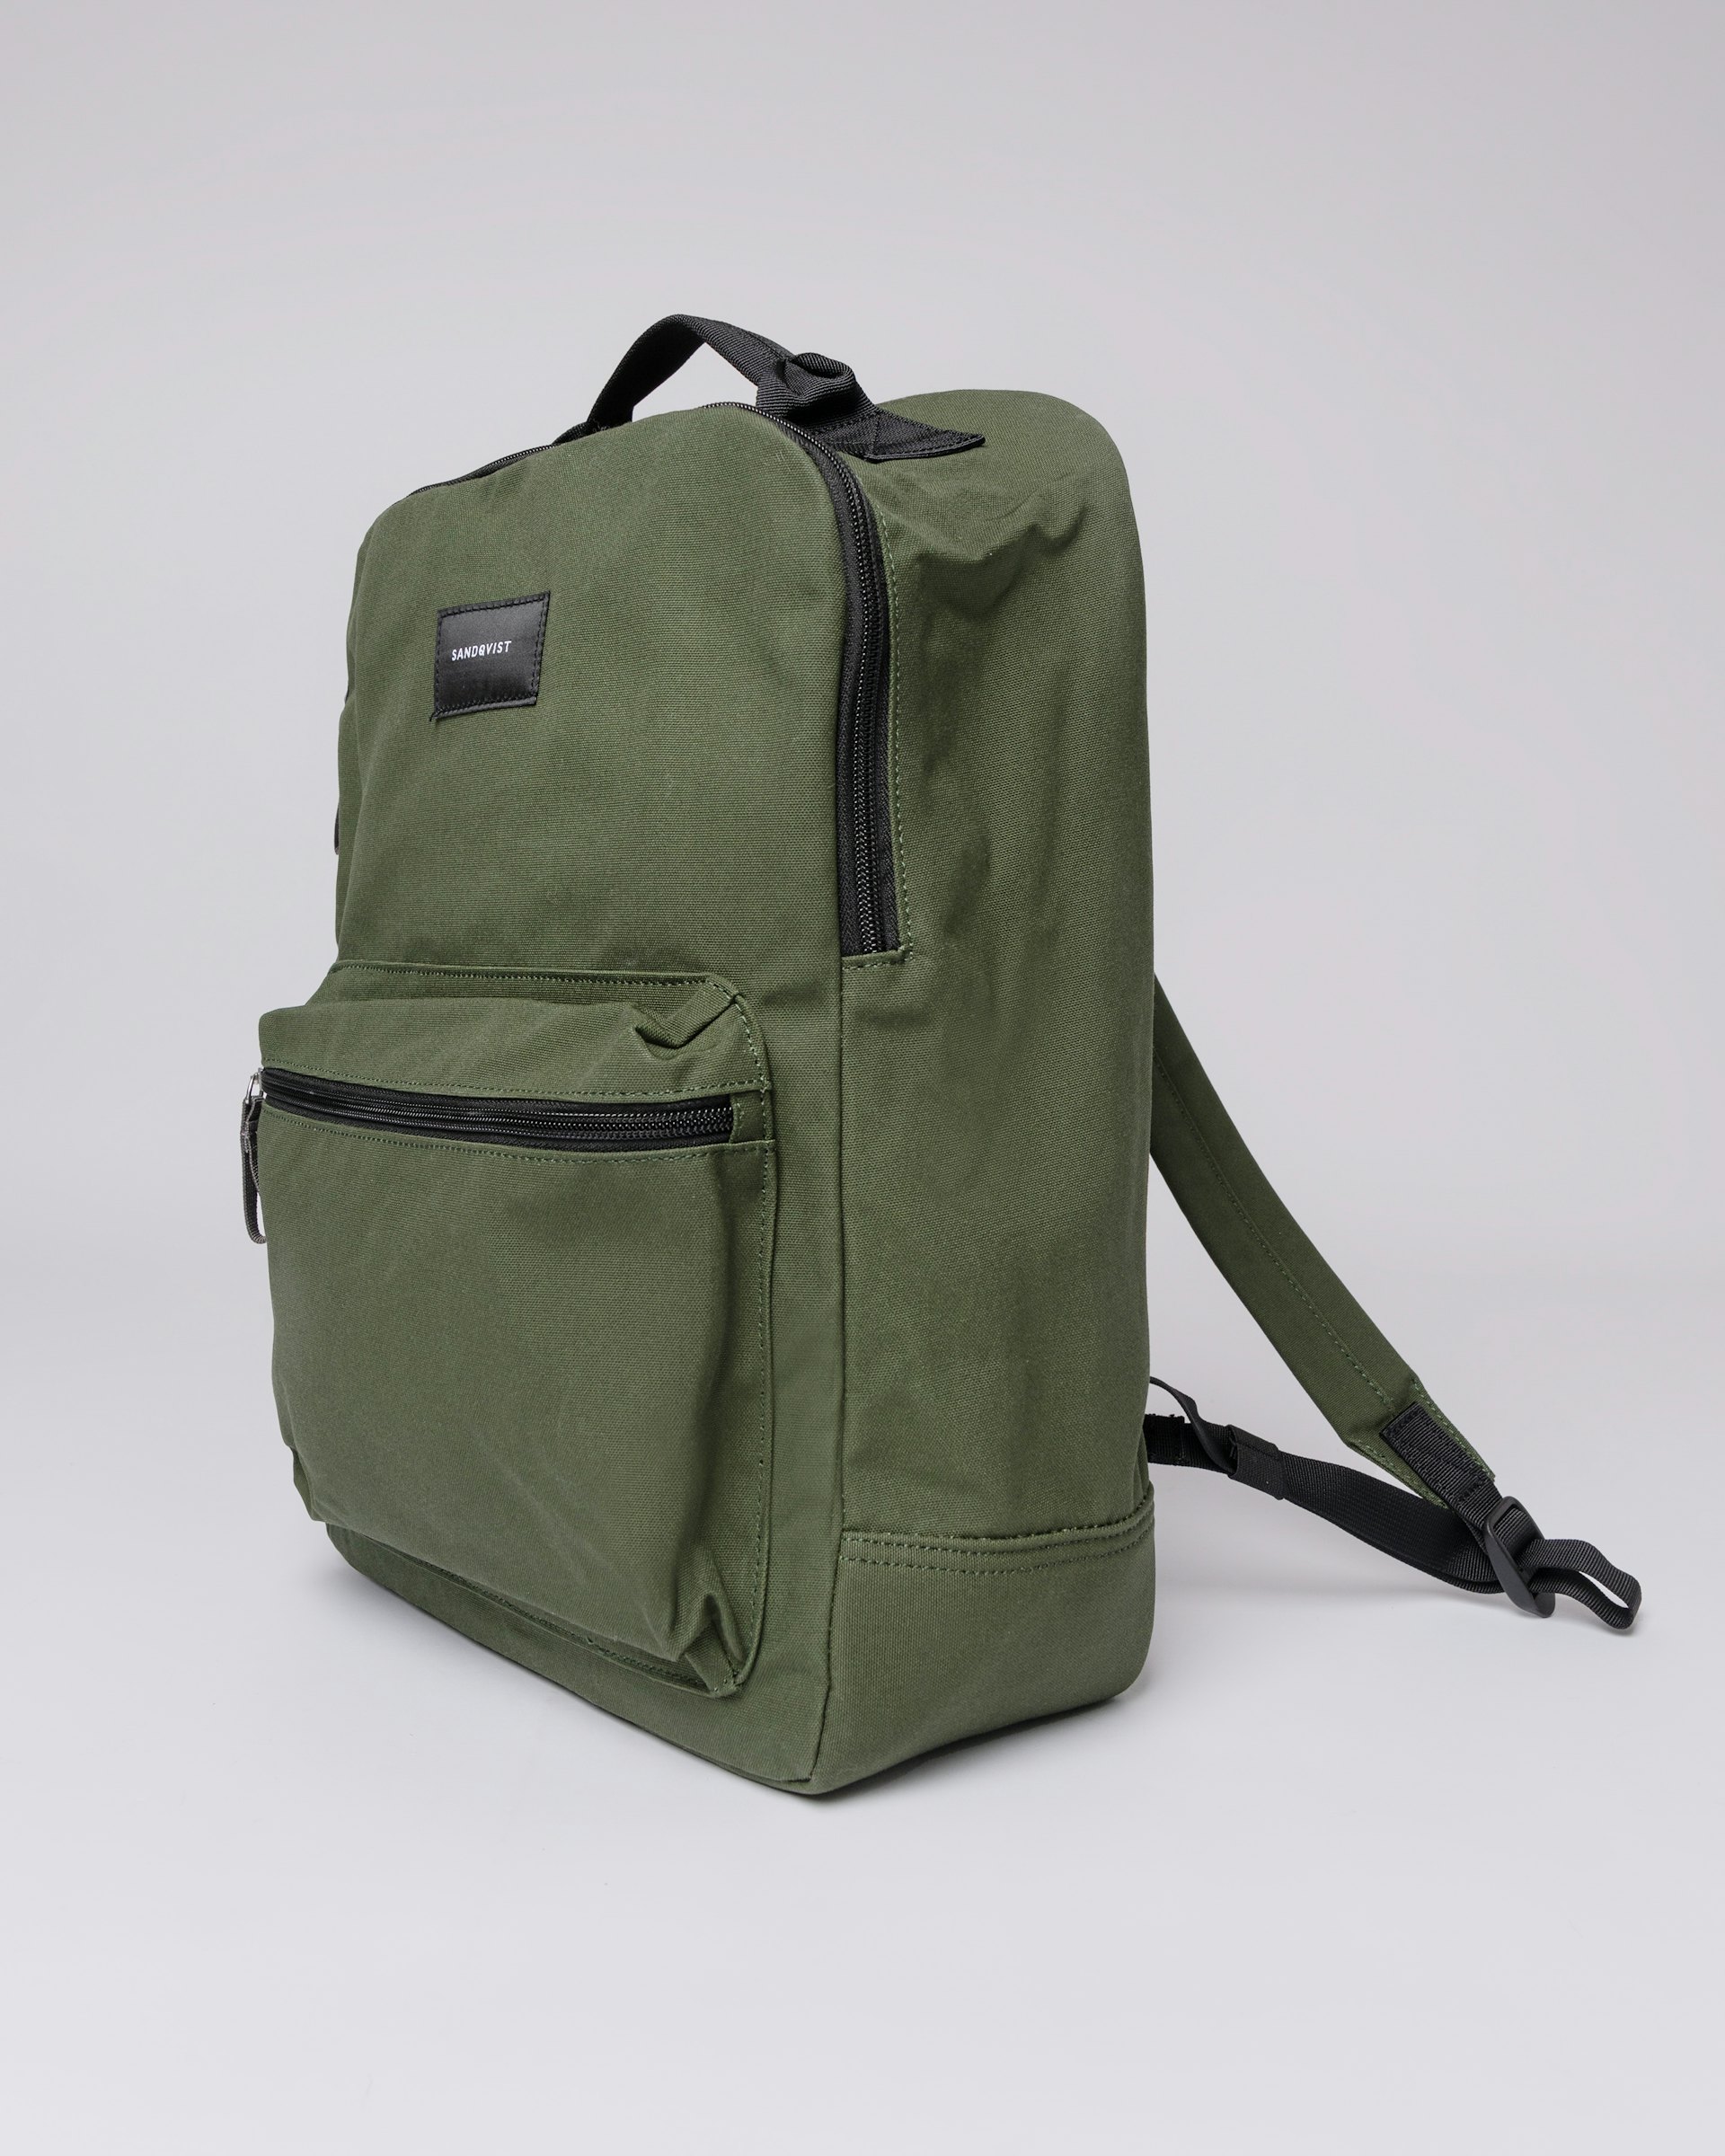 August belongs to the category Backpacks and is in color dawn green (4 of 5)